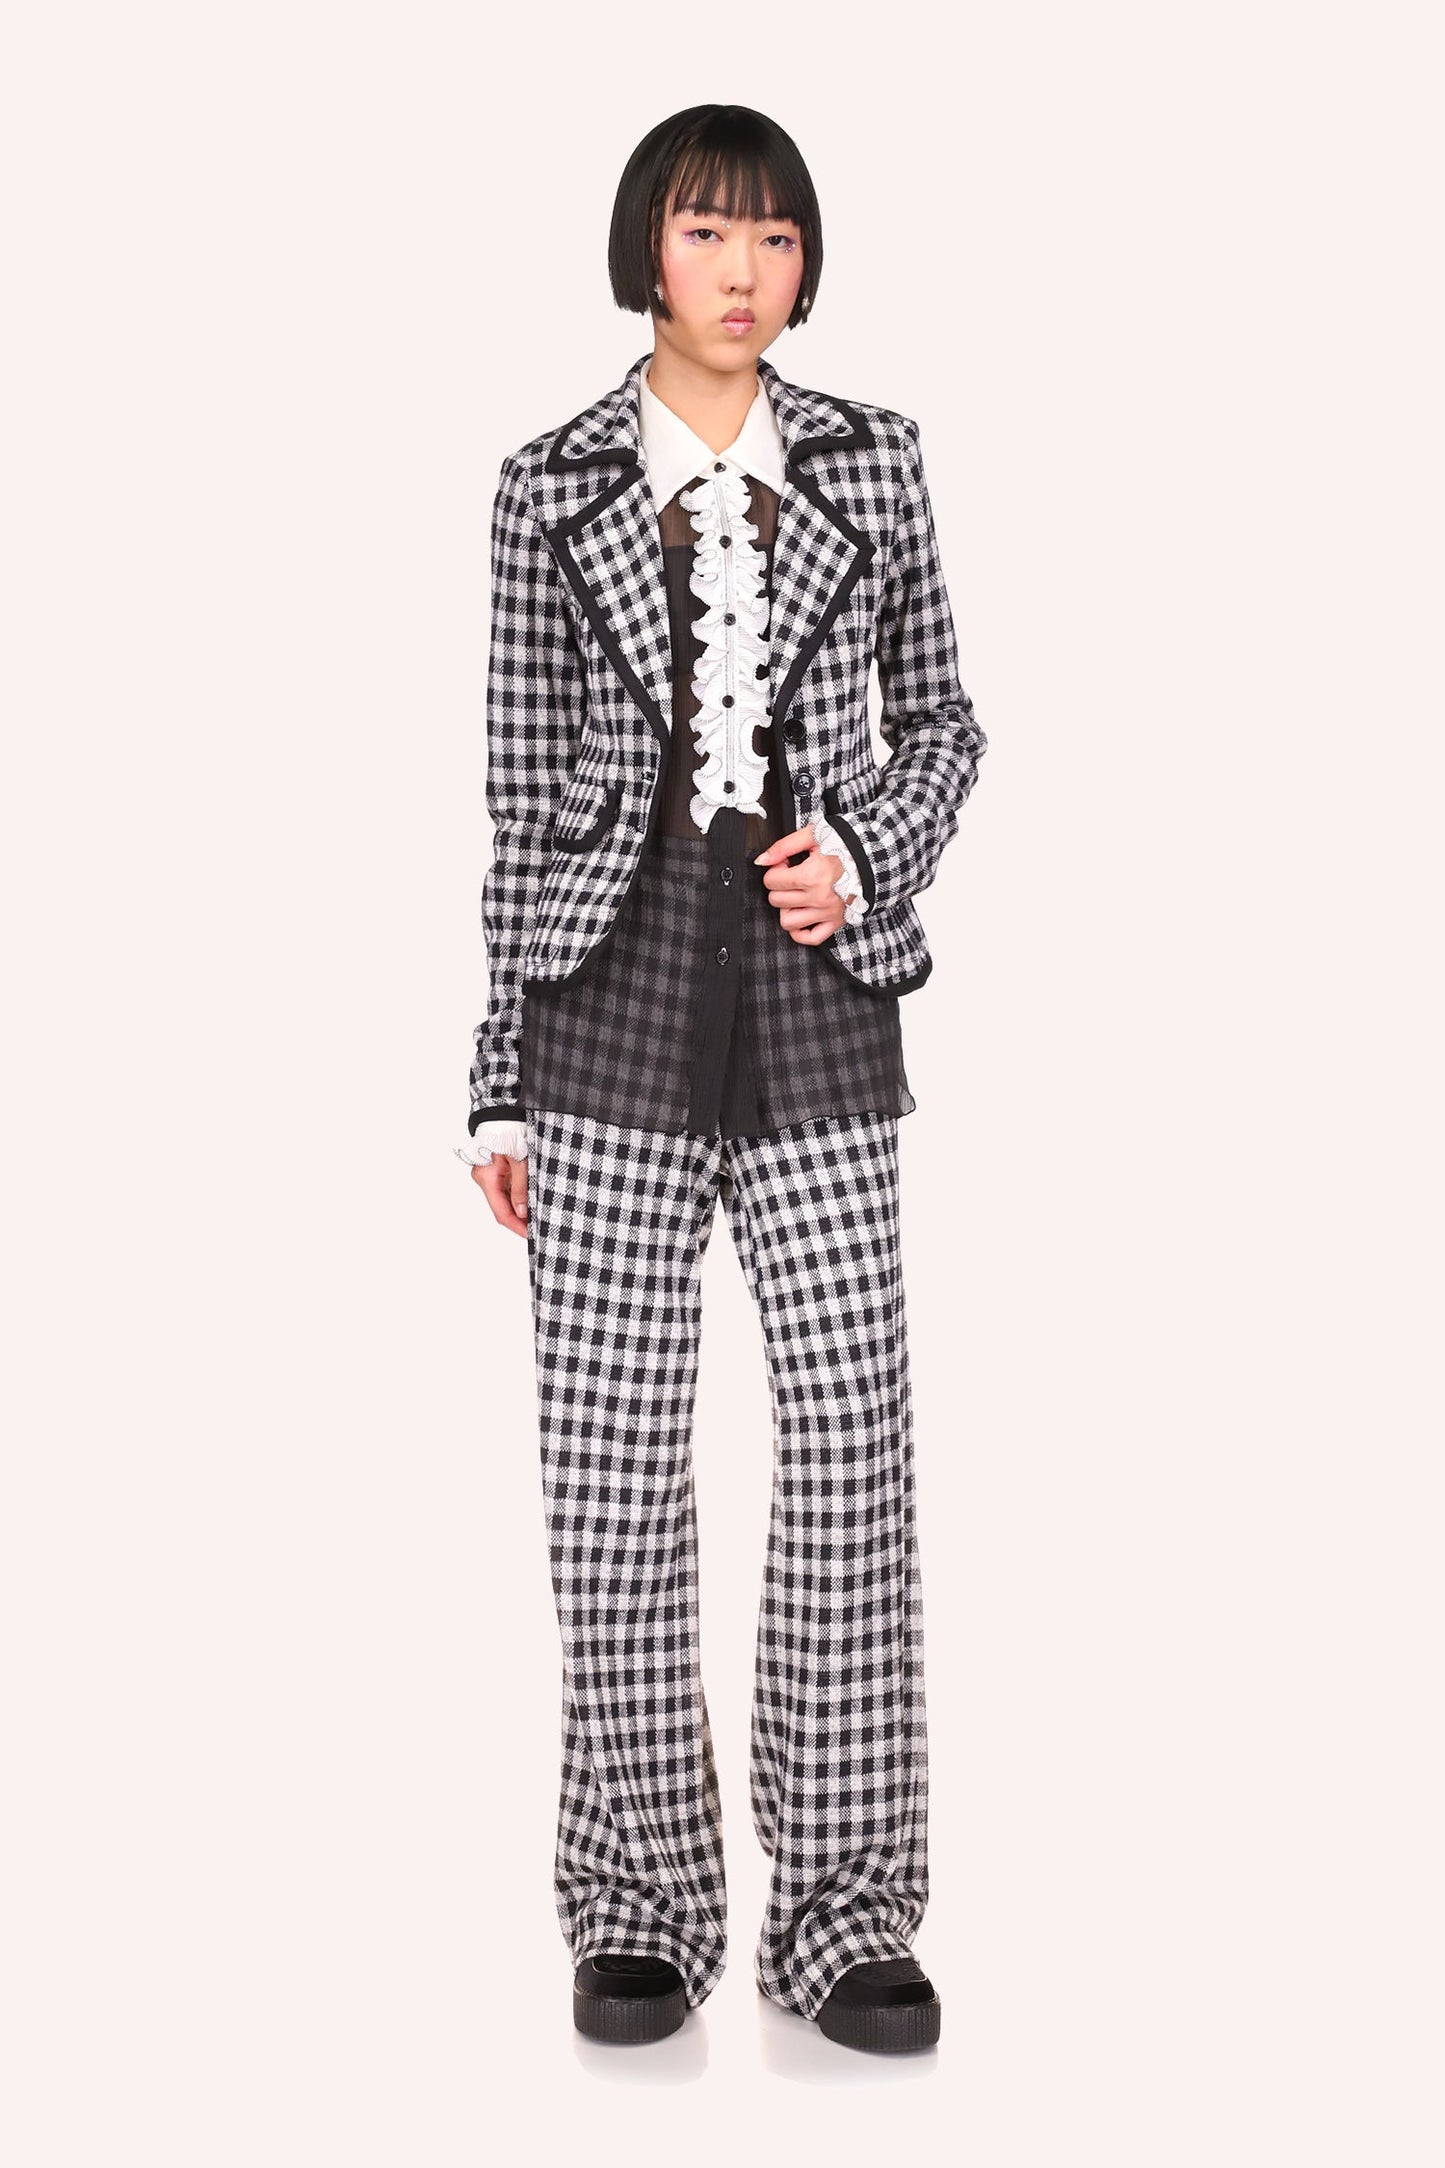 Checkered in B&W, black seams, a wide collar with a V-shaped flap, enhance your curves